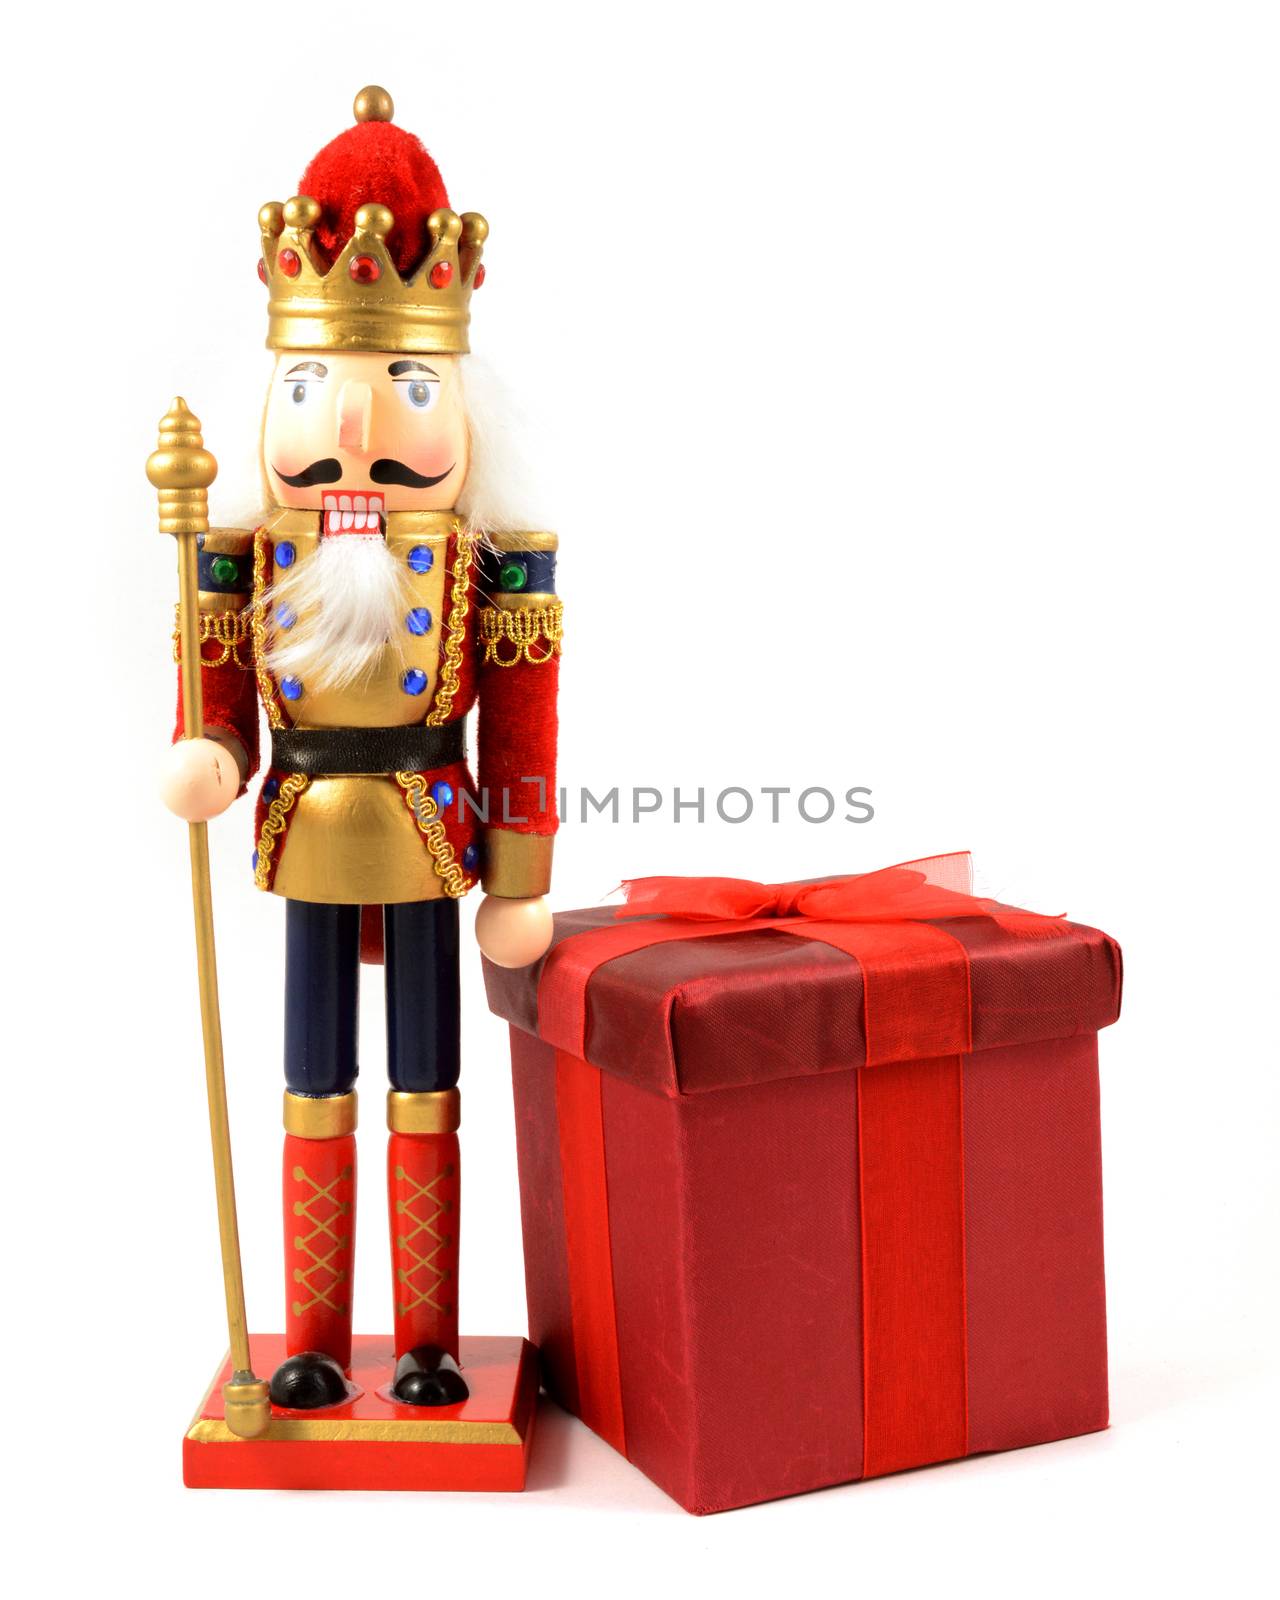 An isolated over white image of a king nutcracker with a red Christmas gift.